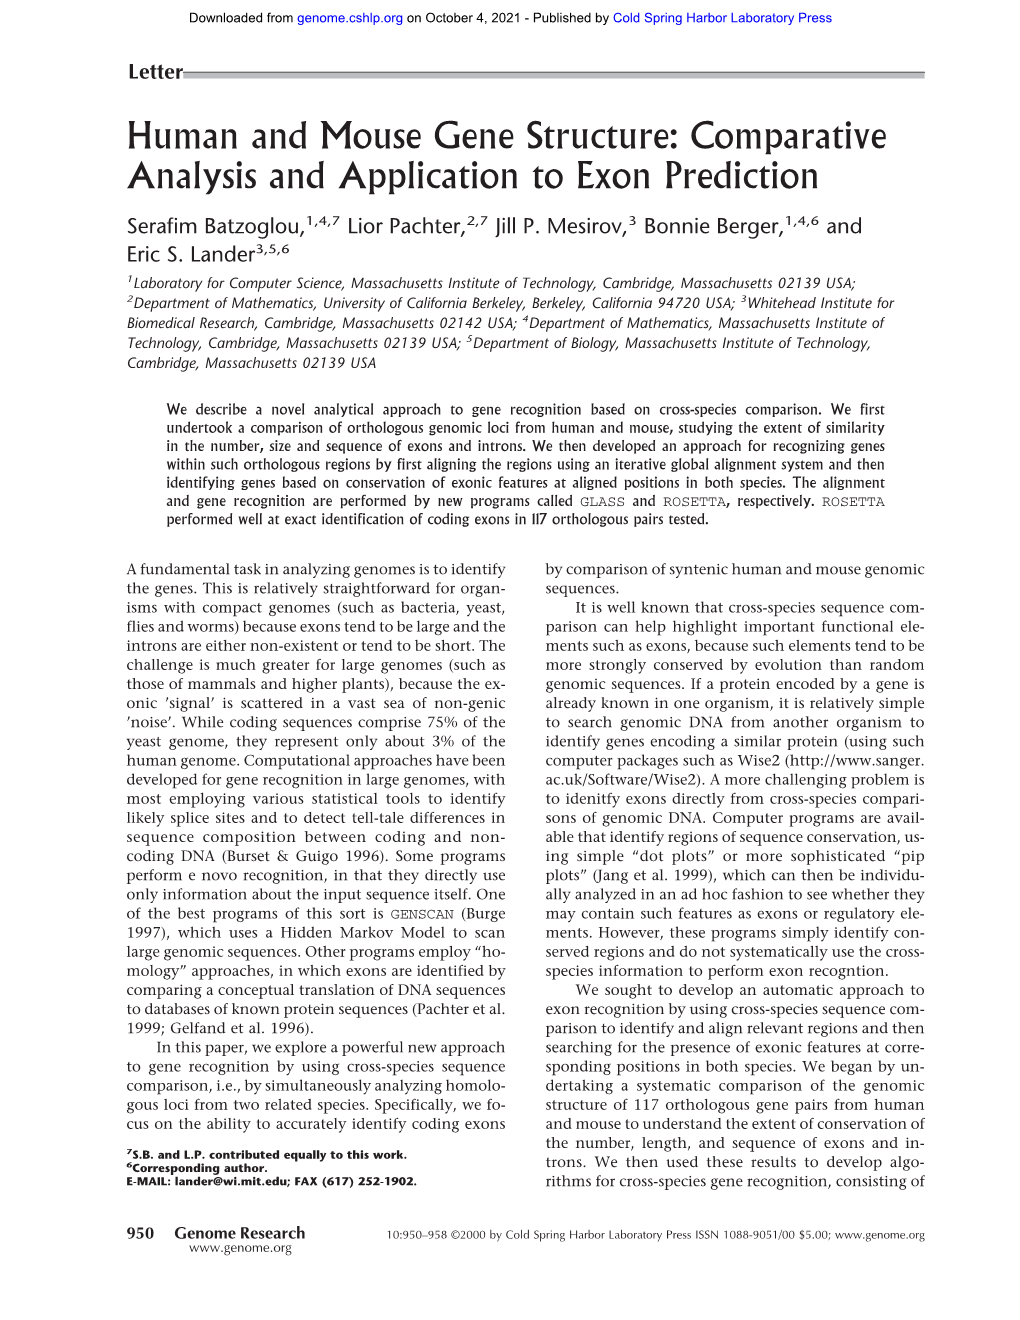 Human and Mouse Gene Structure: Comparative Analysis and Application to Exon Prediction